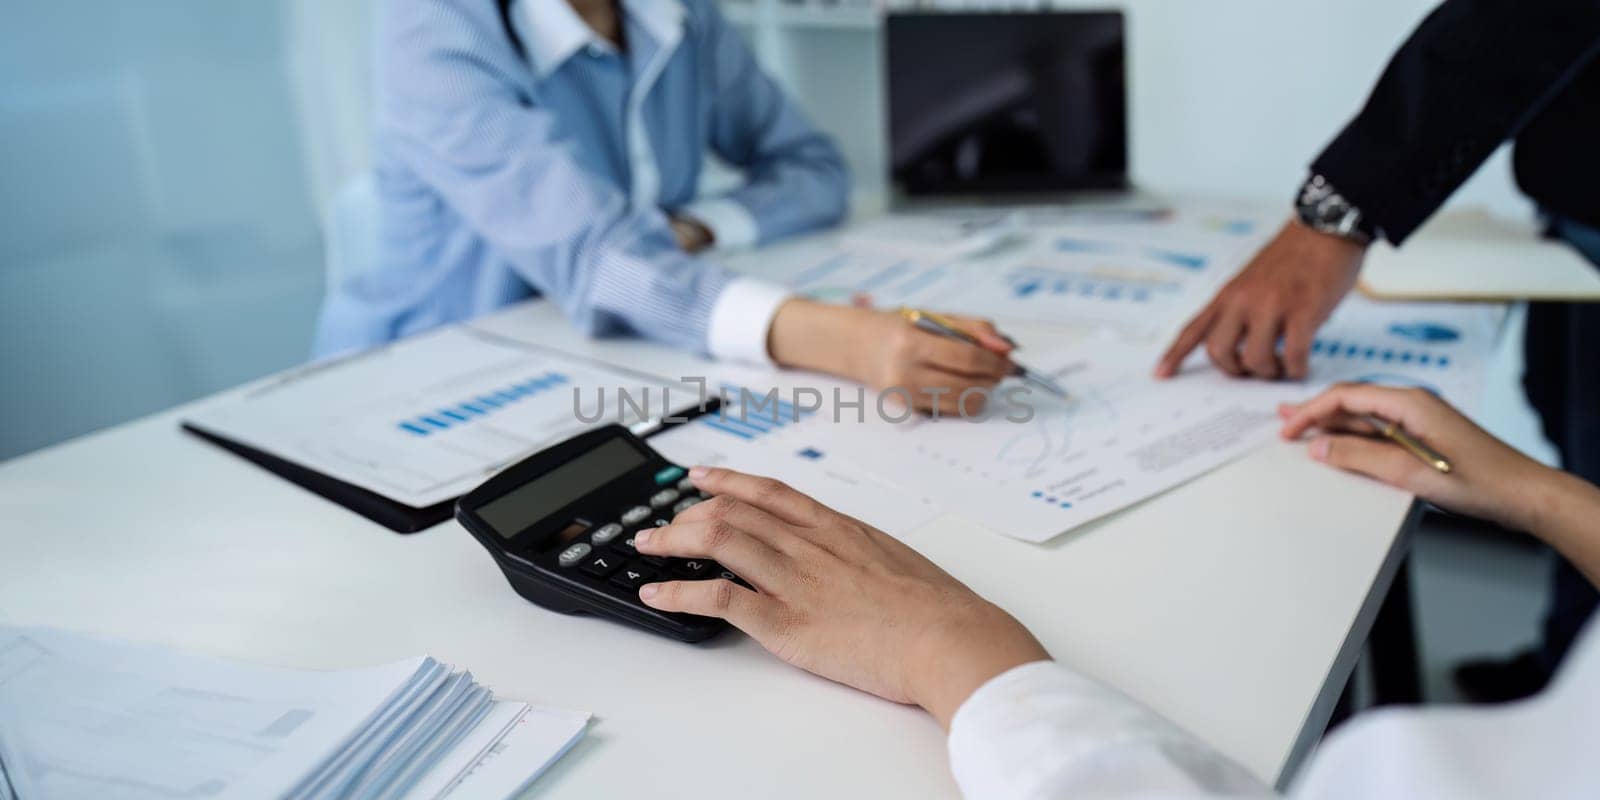 Businesswoman using a calculator to calculate numbers on a company's financial documents, she is analyzing historical financial data to plan how to grow the company. Financial concept by itchaznong